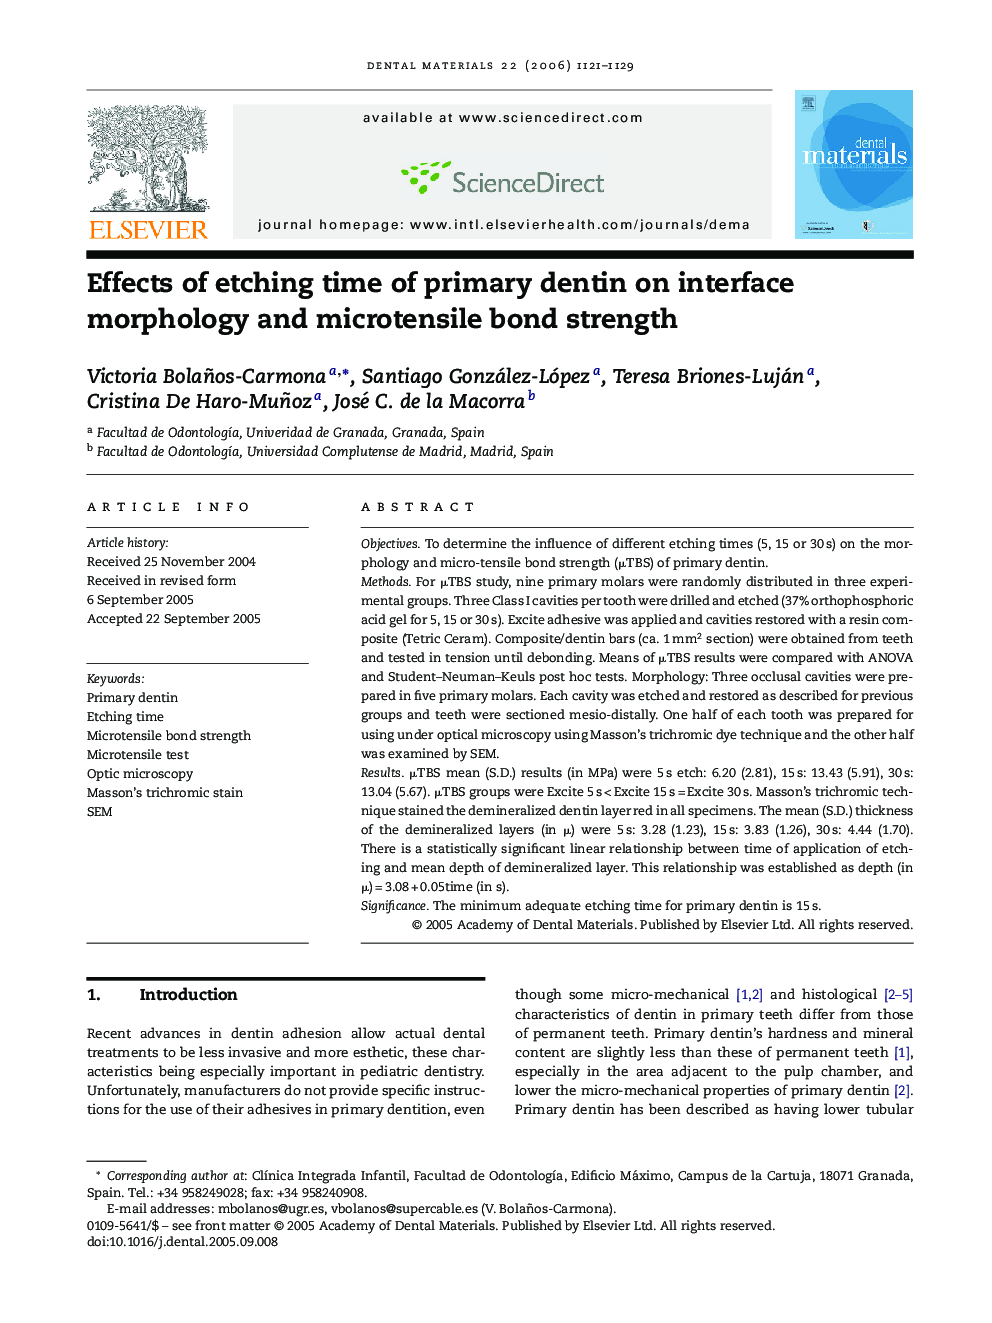 Effects of etching time of primary dentin on interface morphology and microtensile bond strength